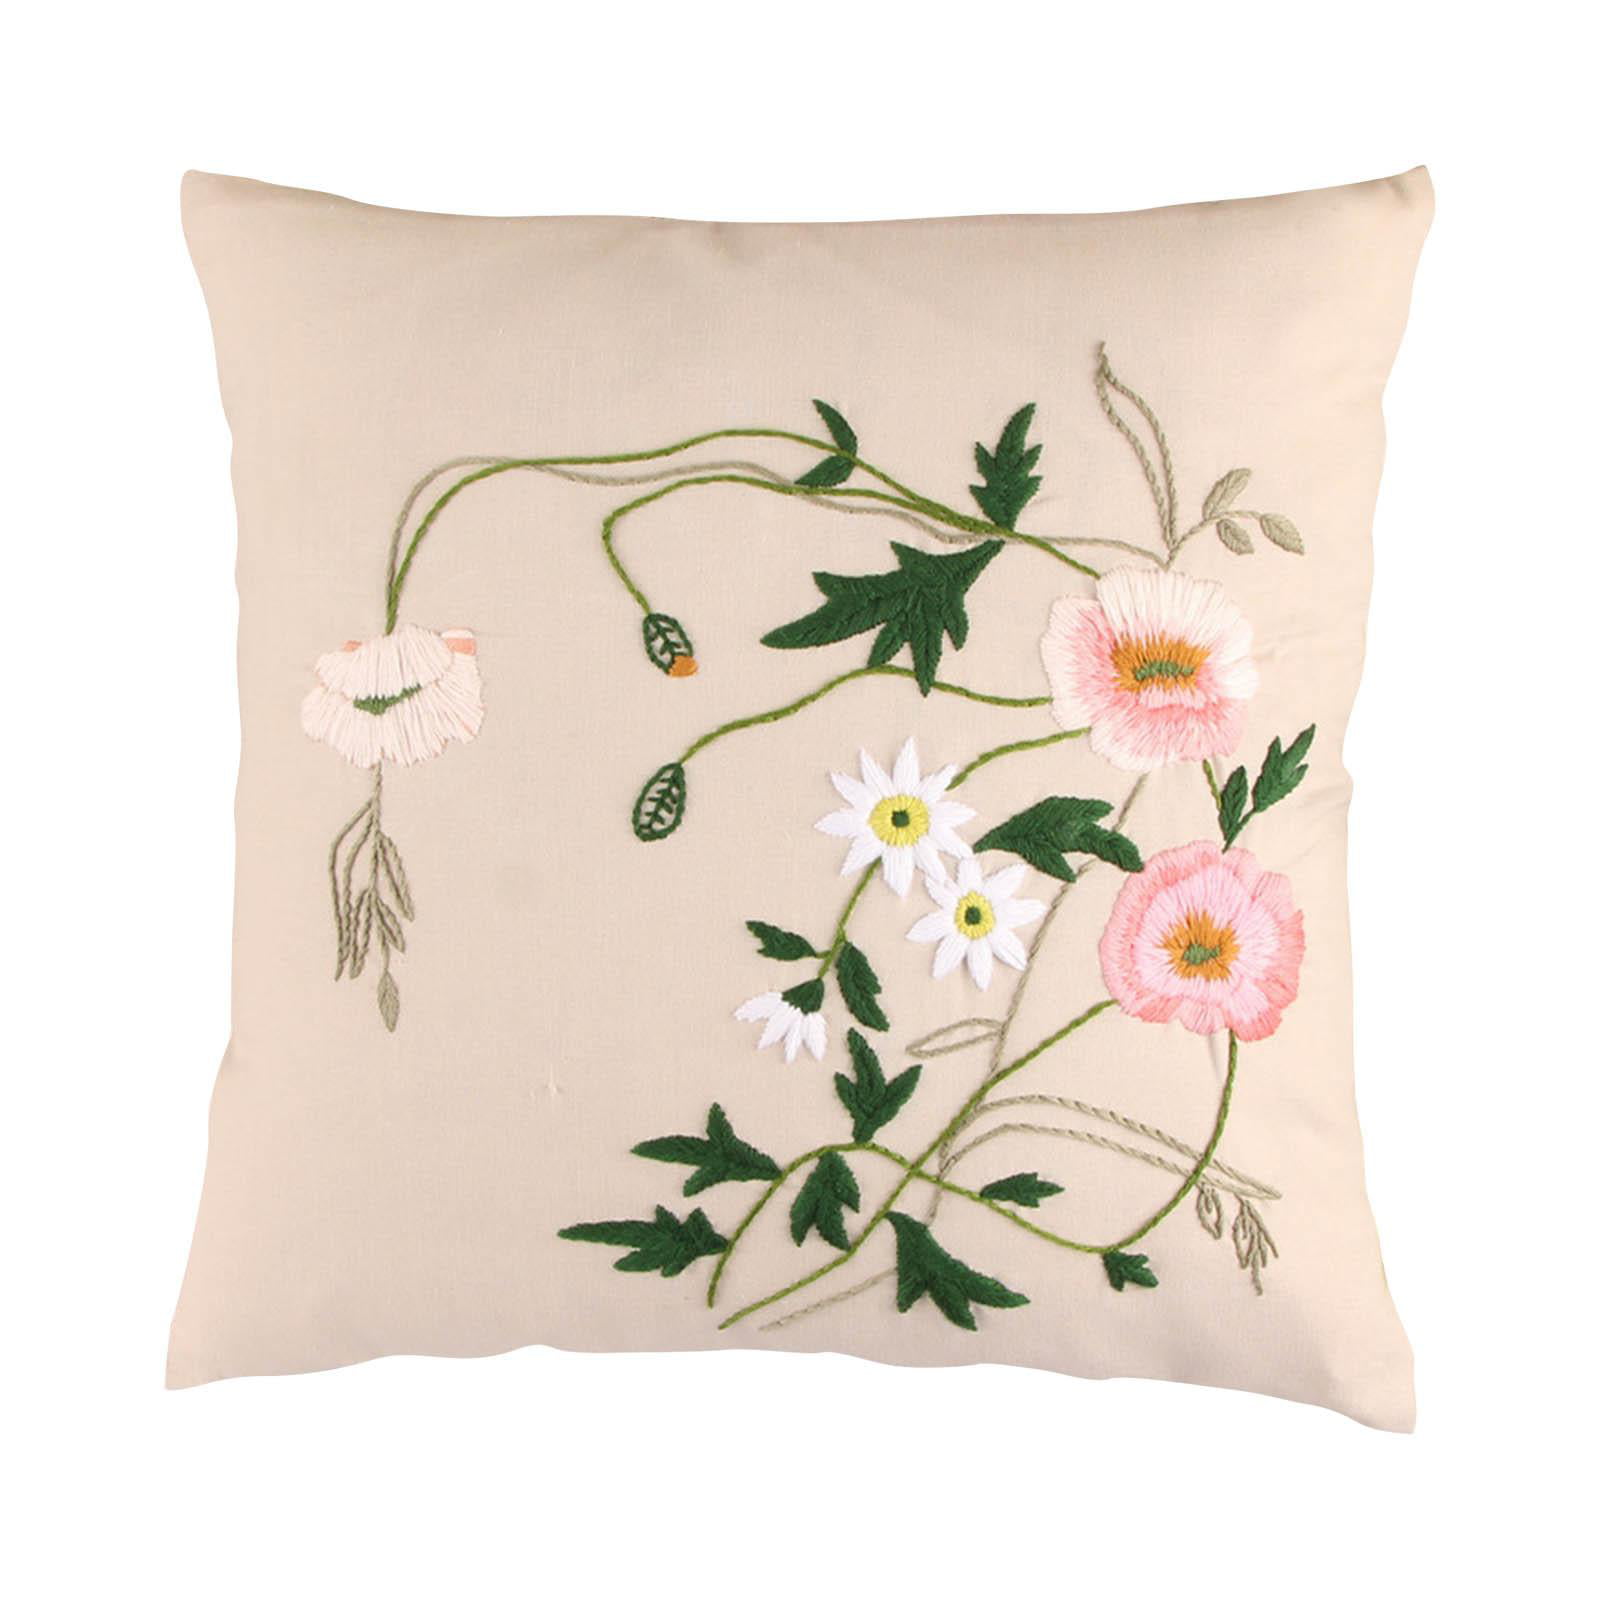 Elegant Pillow Cover Stitch Floral Pattern Handy Sewing Handmade